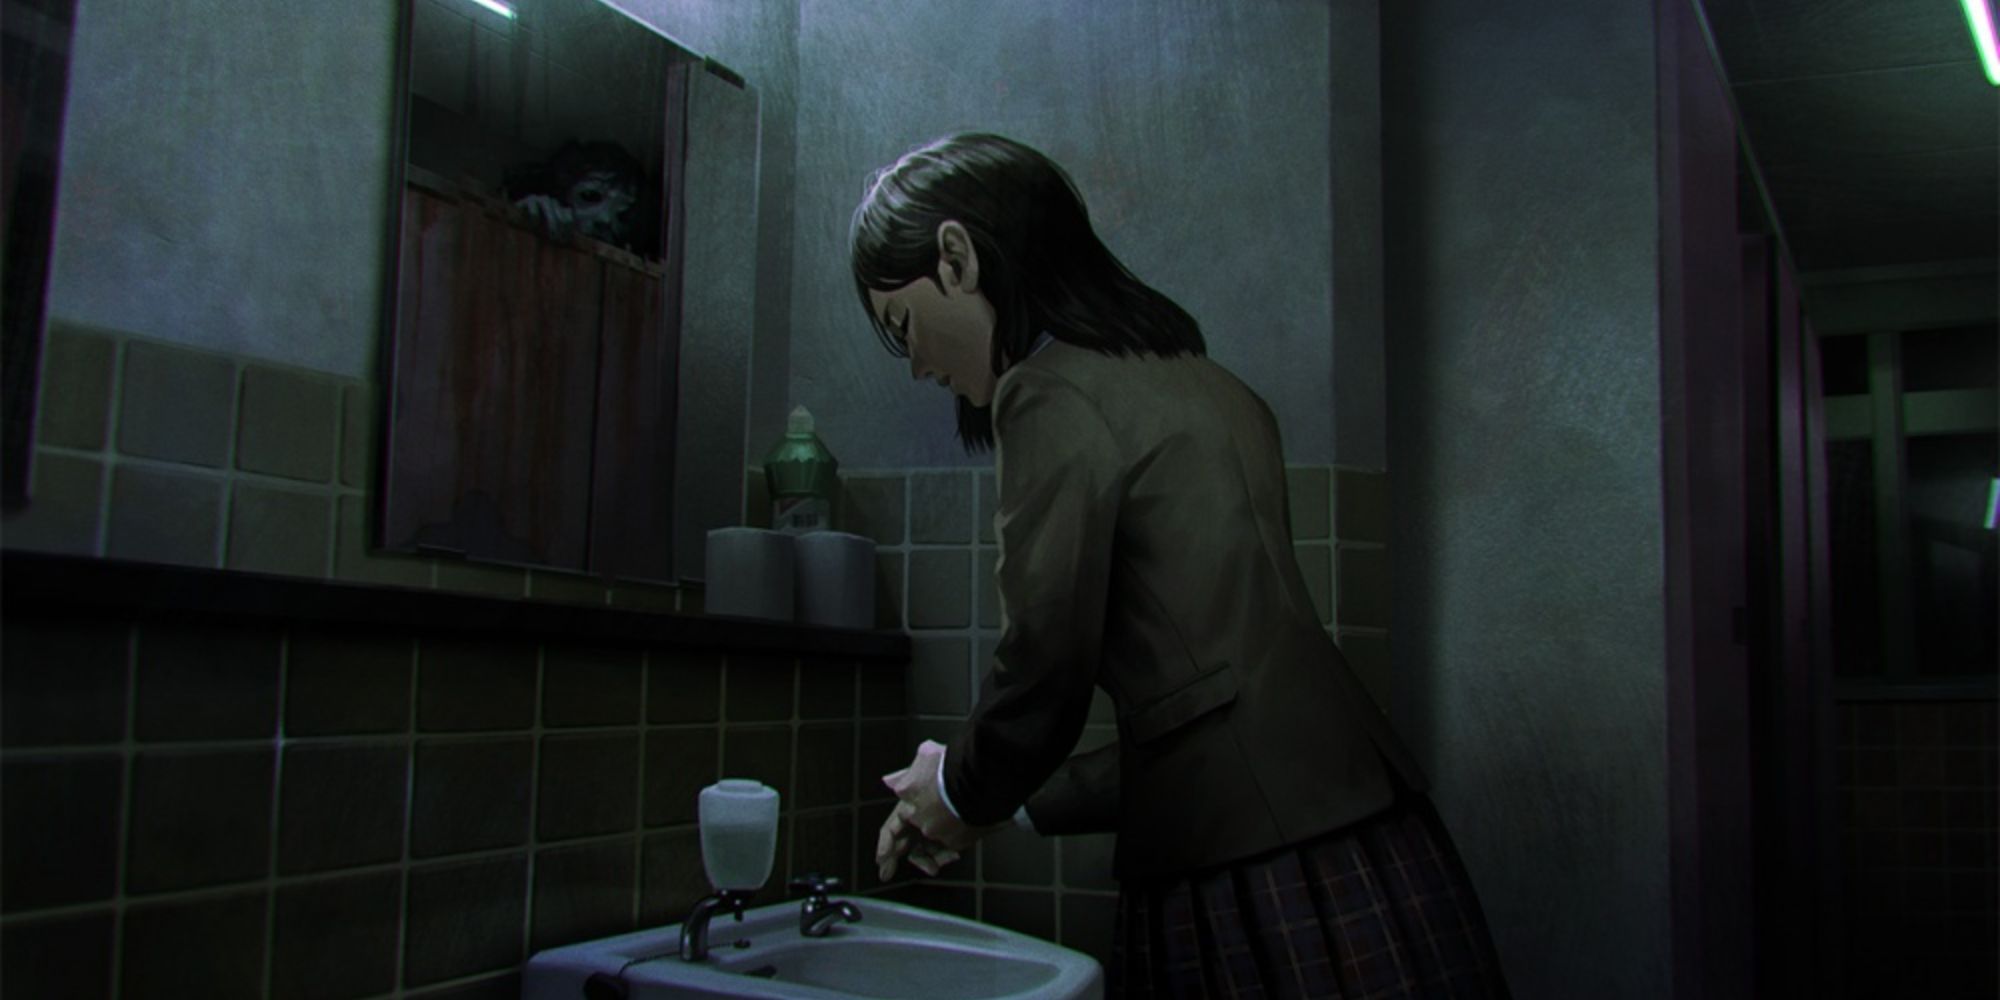 A girl washes her hands while a ghost watches from the reflection on the mirror